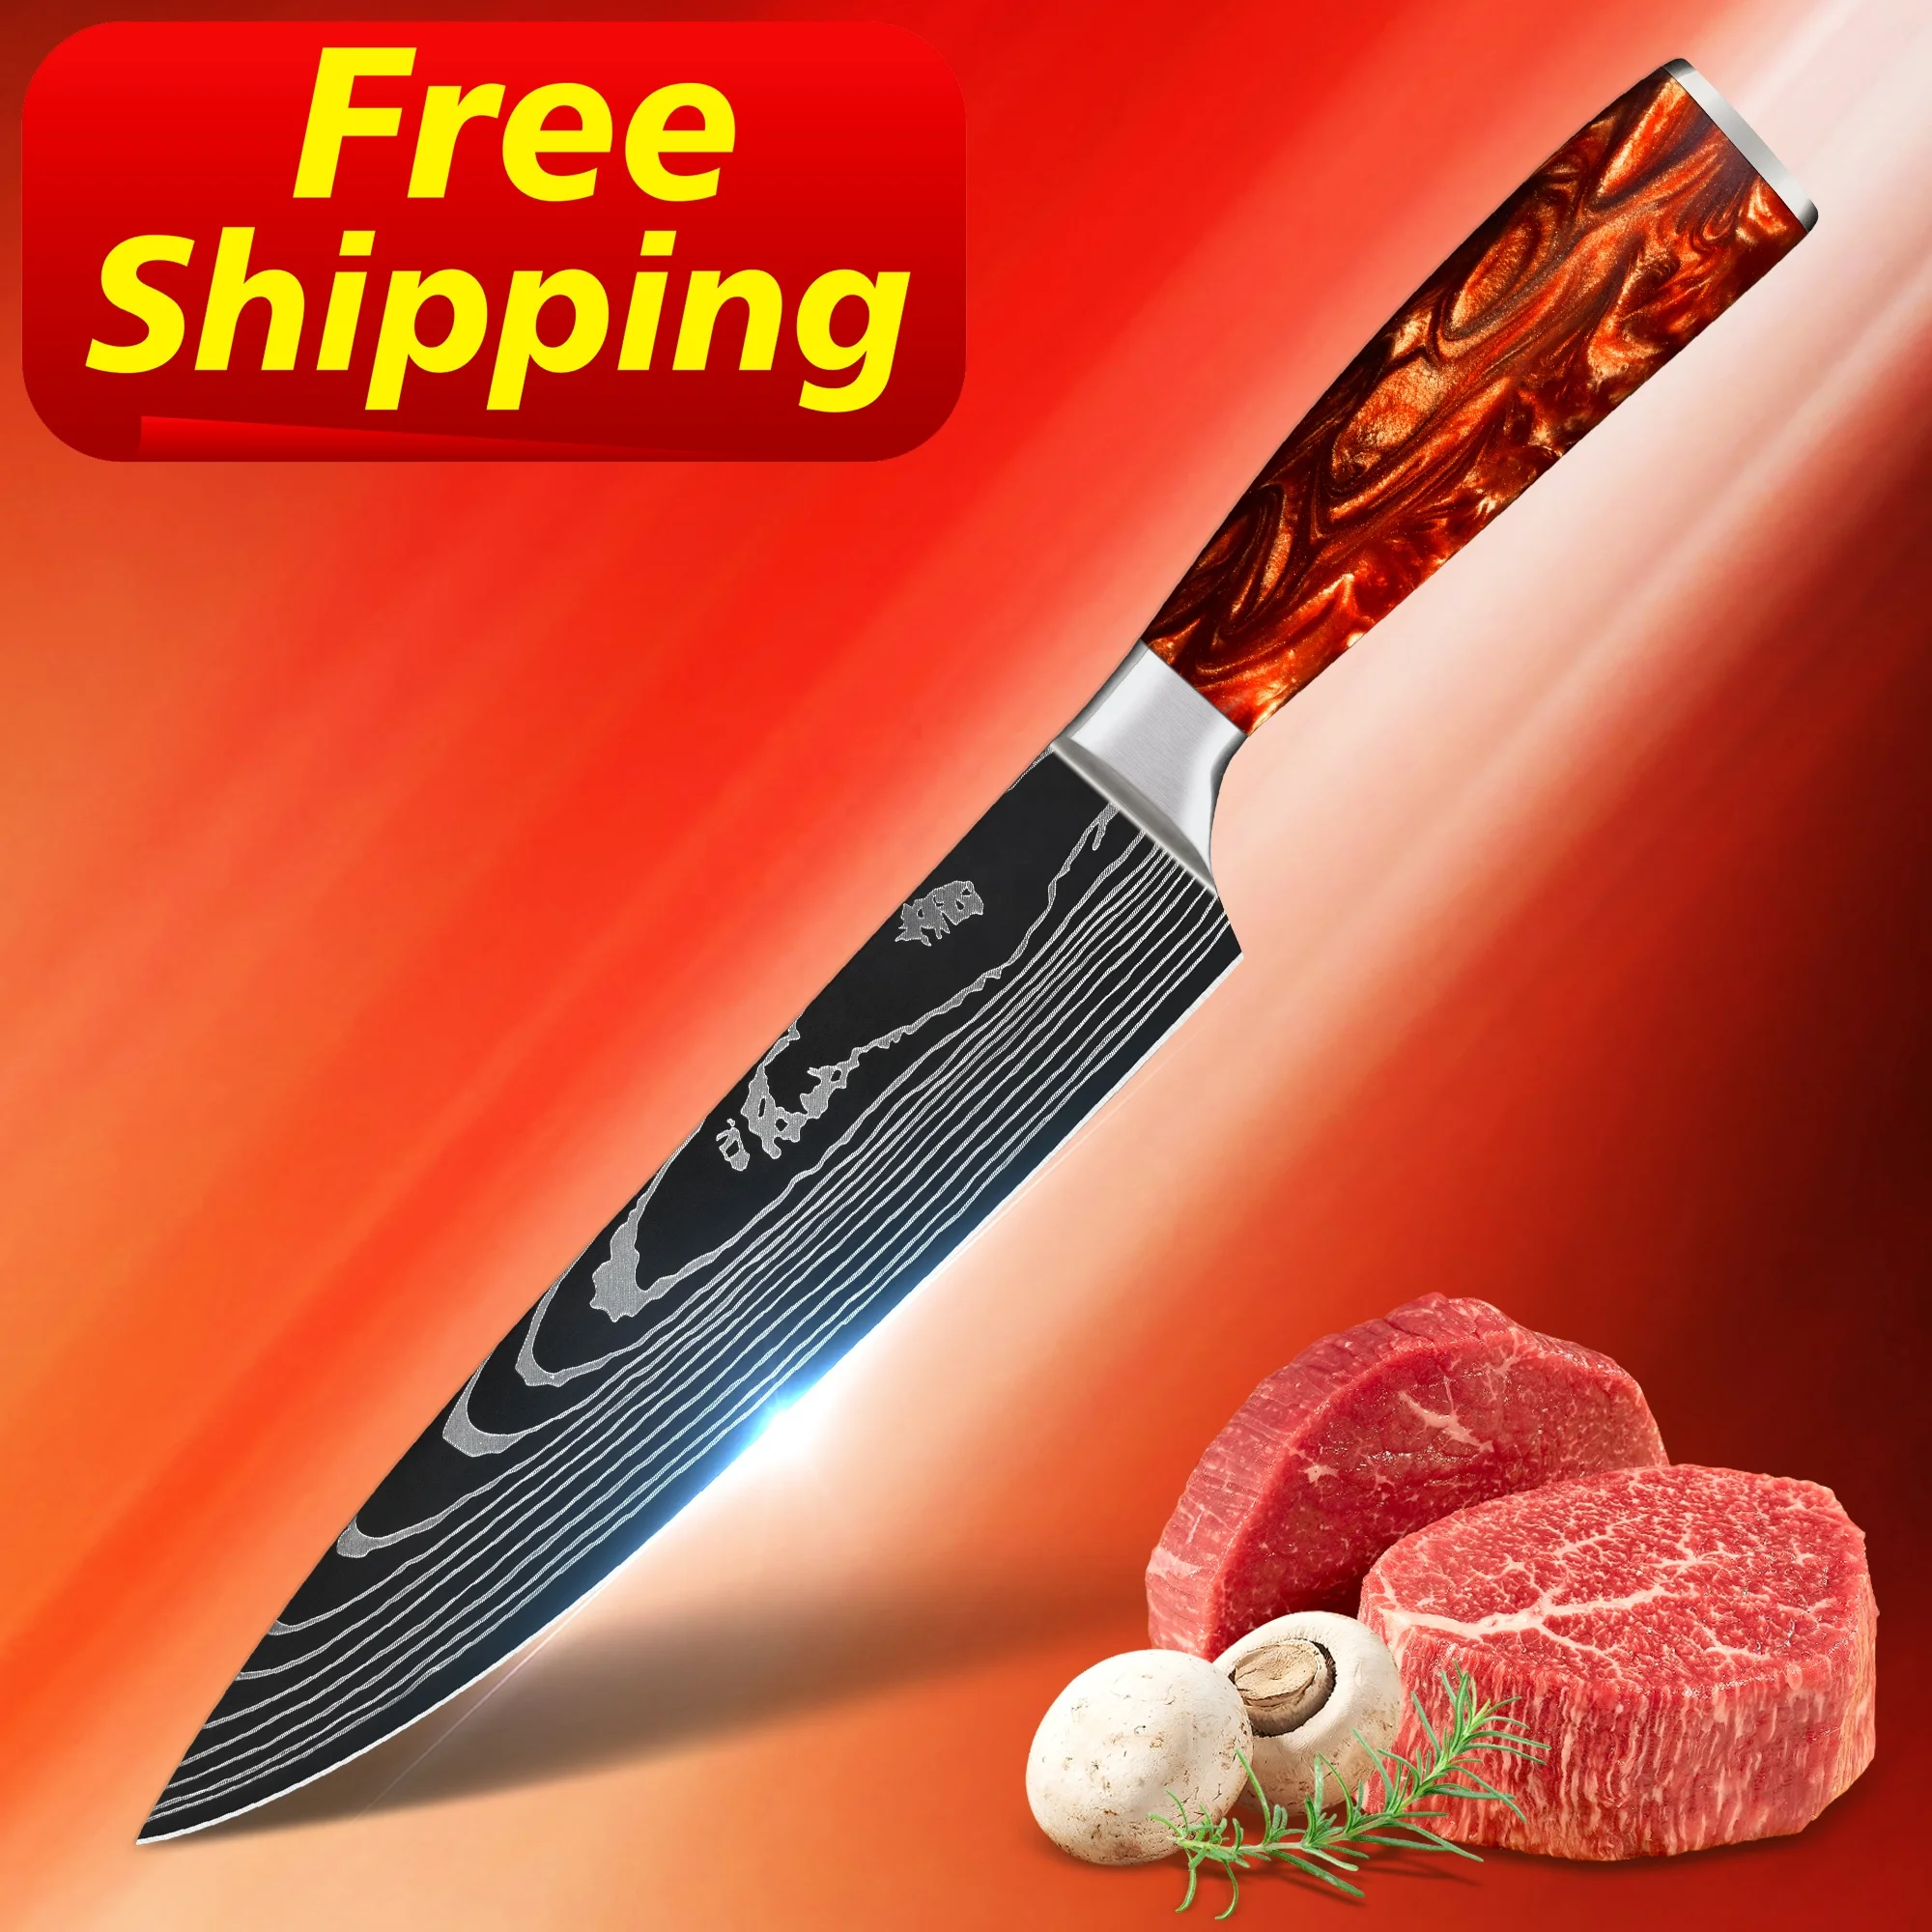 

Free Shipping Lava Red Resin 8 inch damascus chef's knife damascus knife chef knife damascus chef made in Yangjiang, Customized color